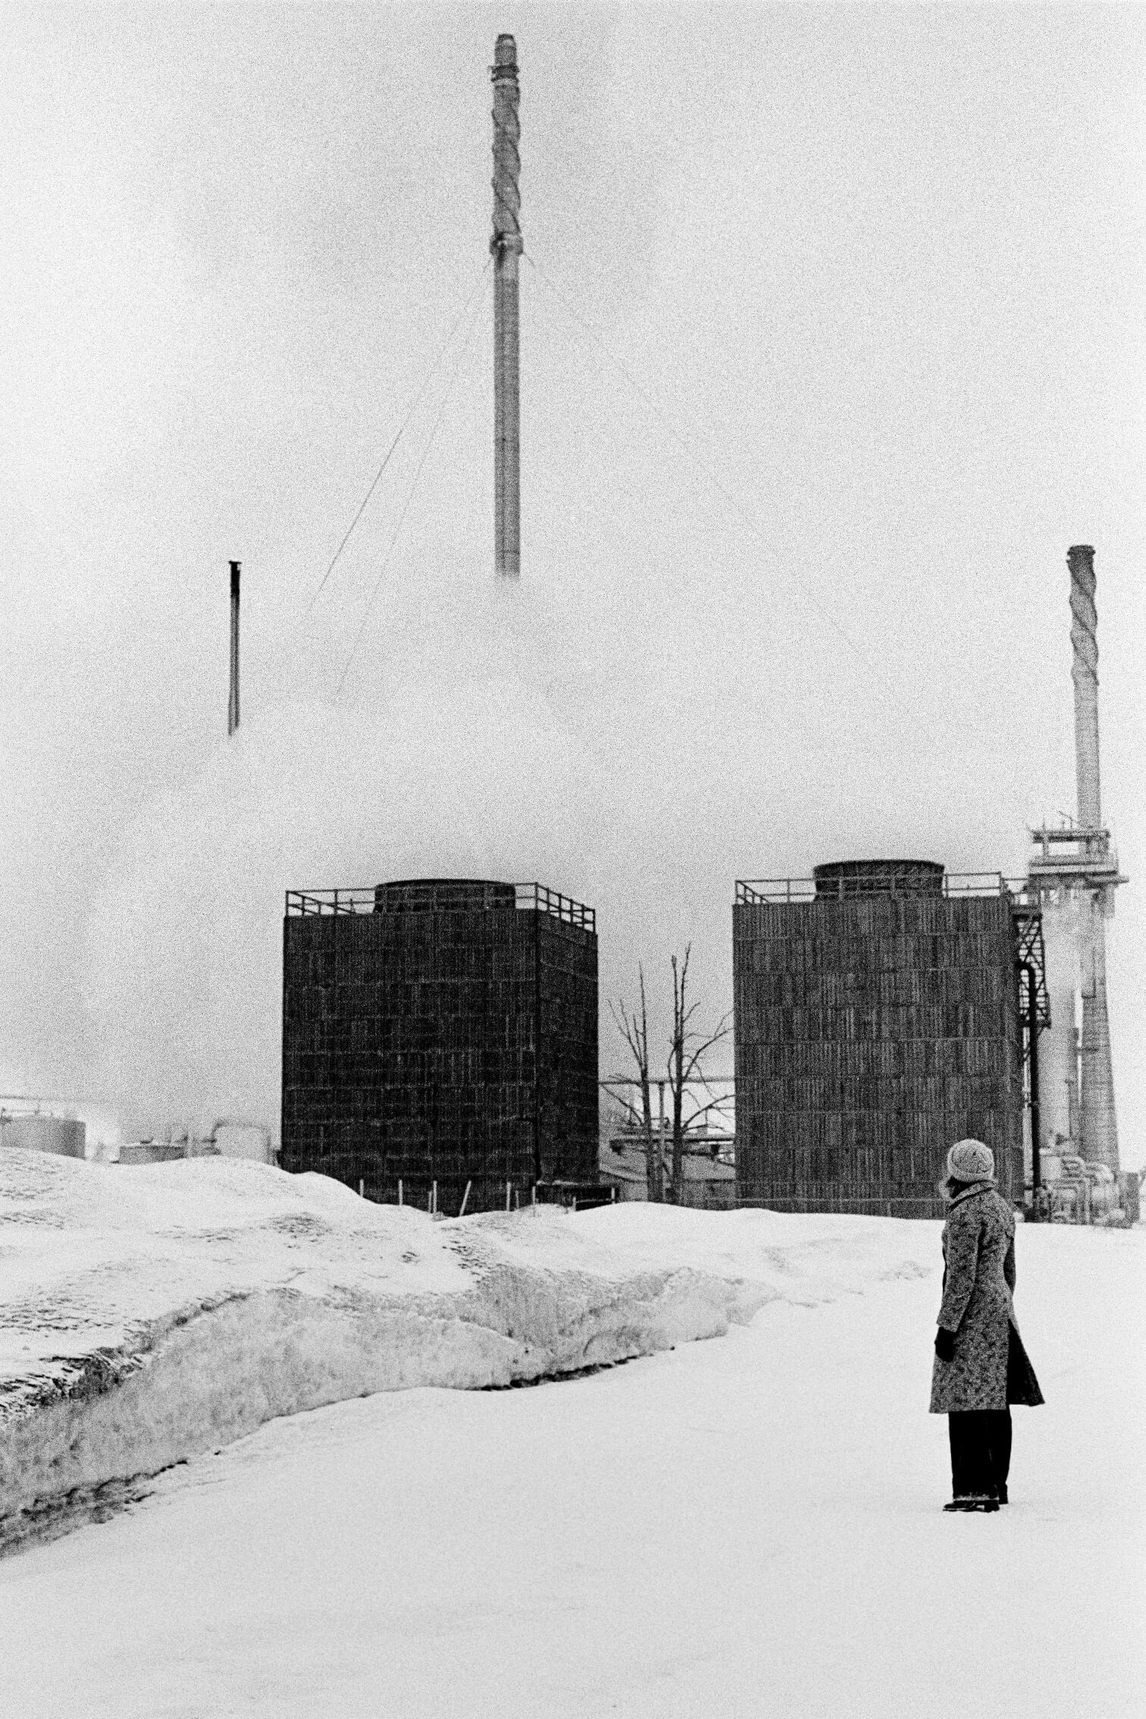 Françoise Sullivan during the performance Walk among the Oil Refineries, 1973.